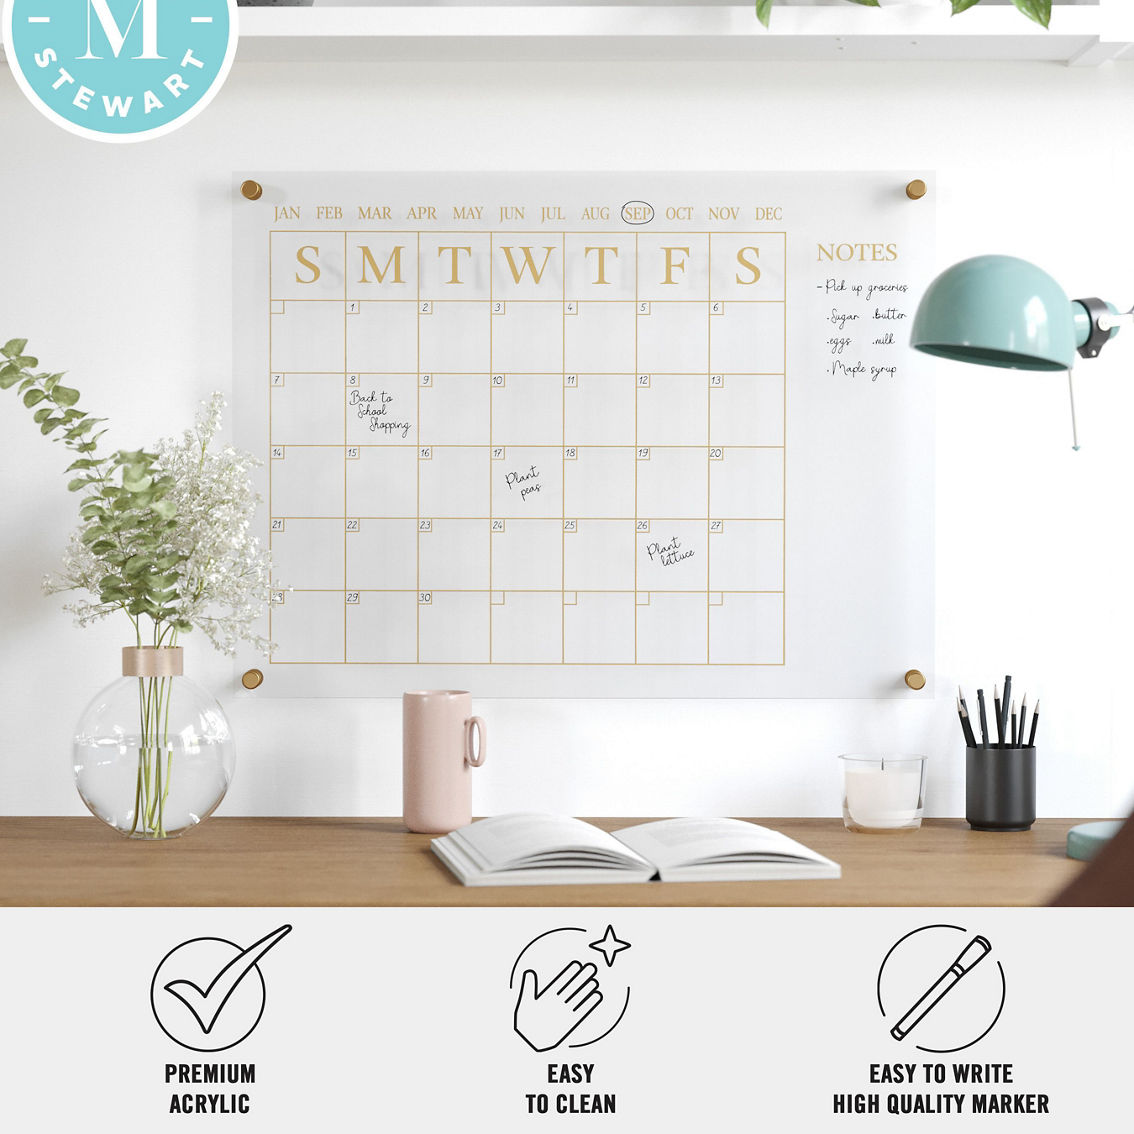 Martha Stewart Acrylic Monthly Wall Calendar with Notes - Image 4 of 5